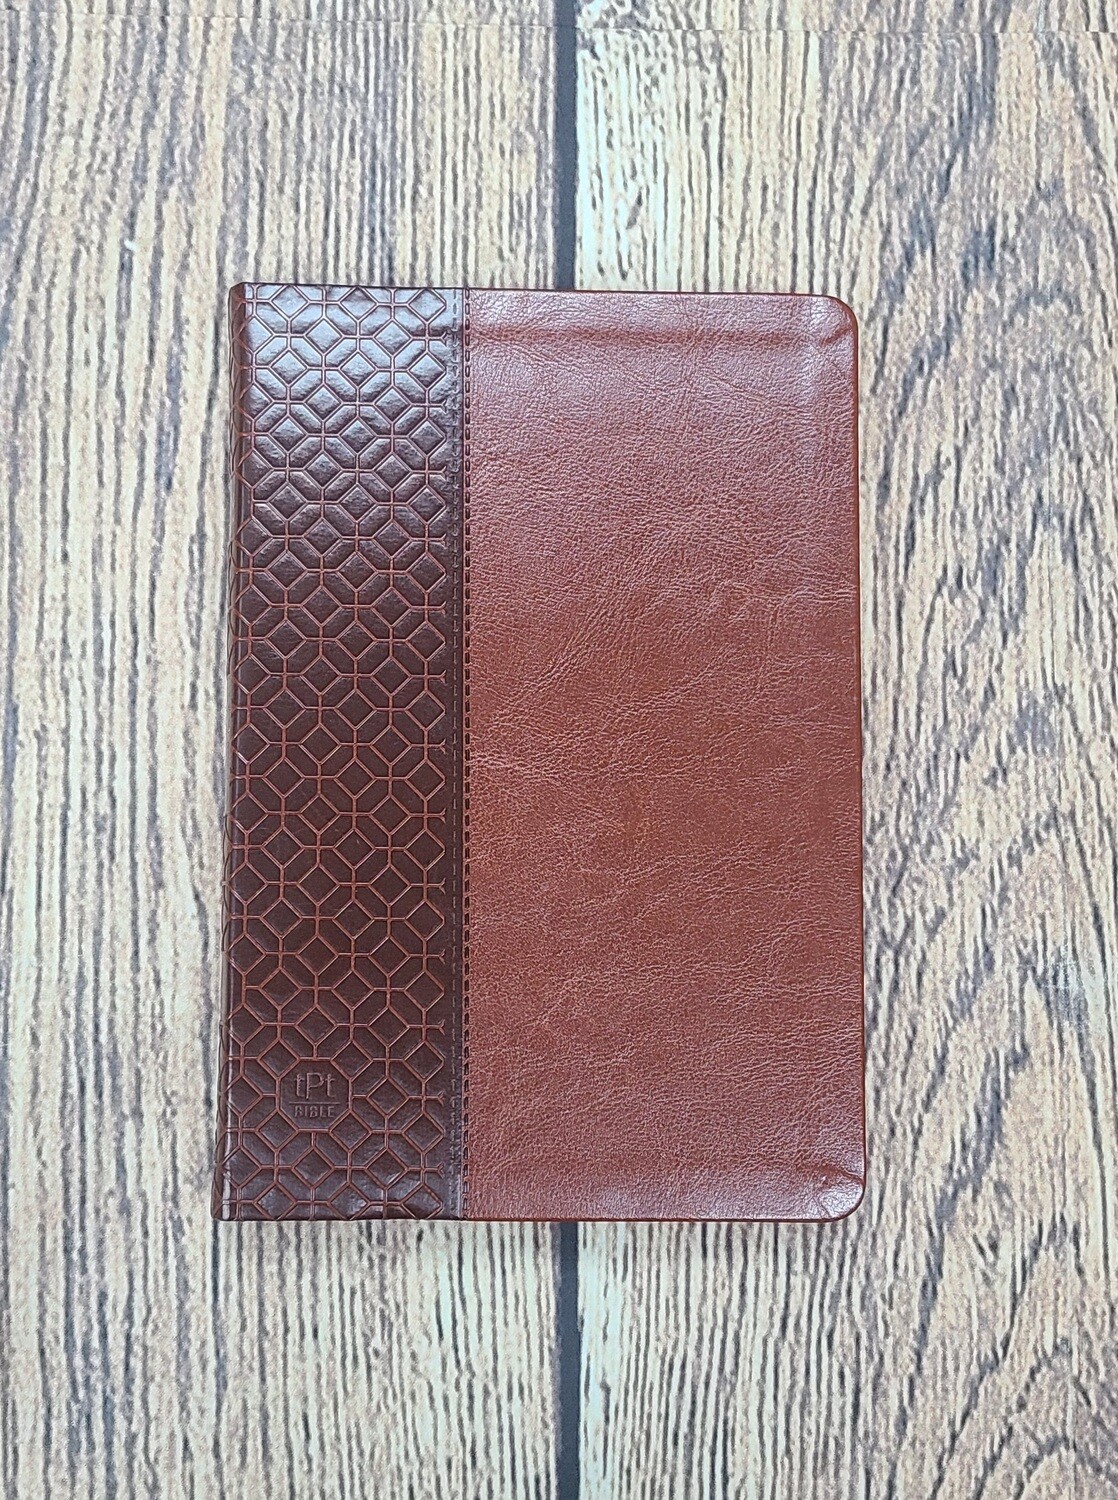 The Passion Translation - New Testament - Large Print Brown Leather